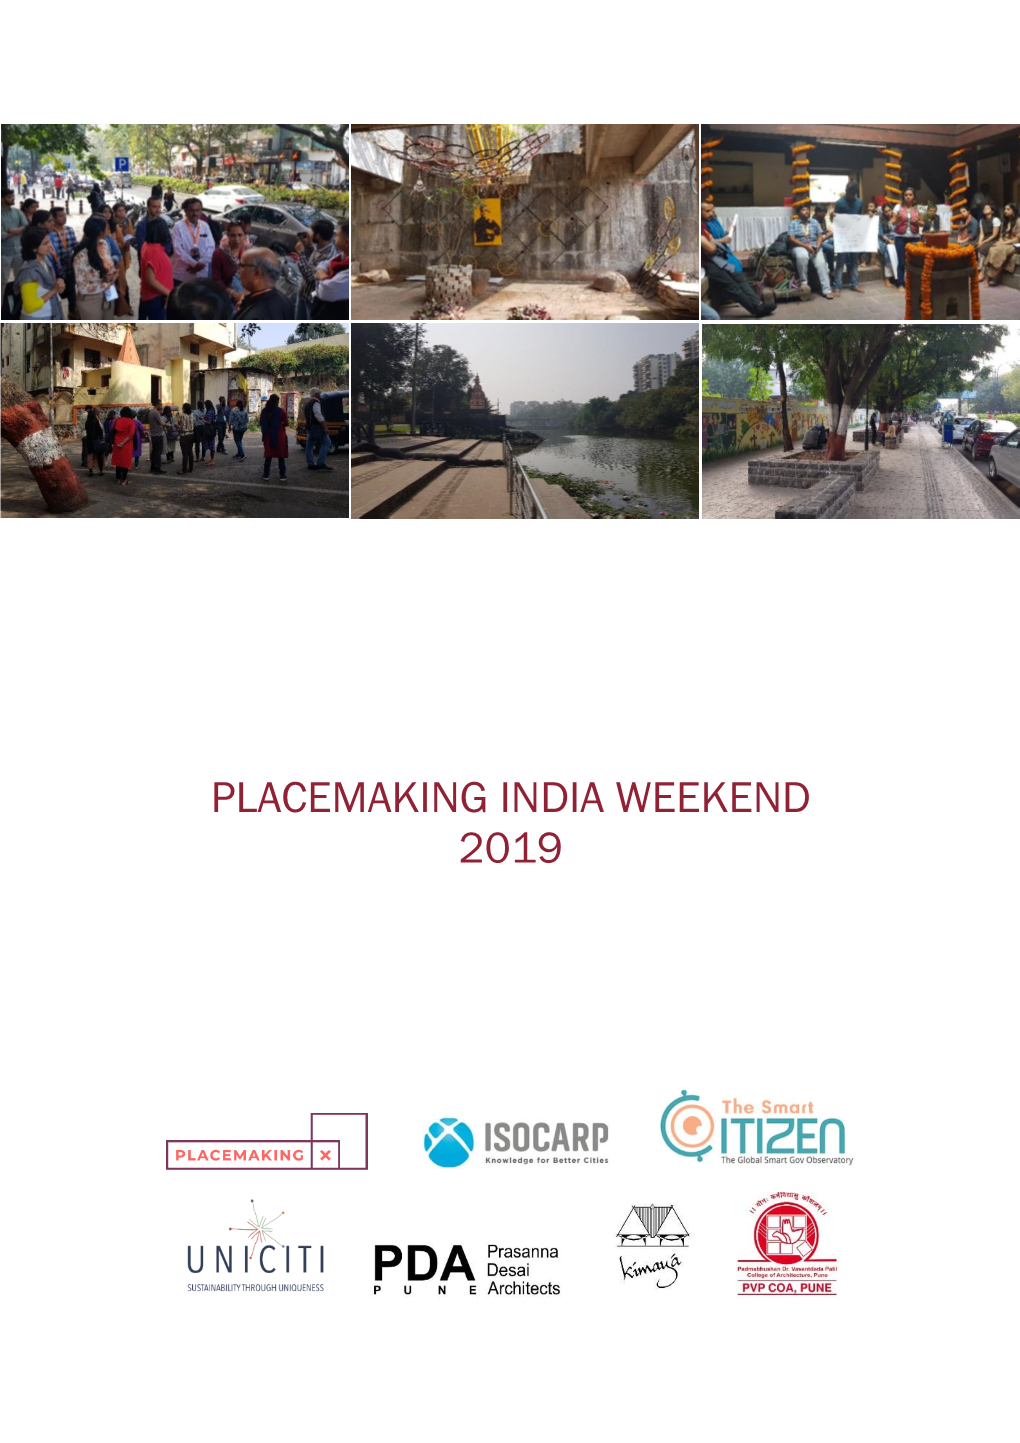 Placemaking India Weekend 2019